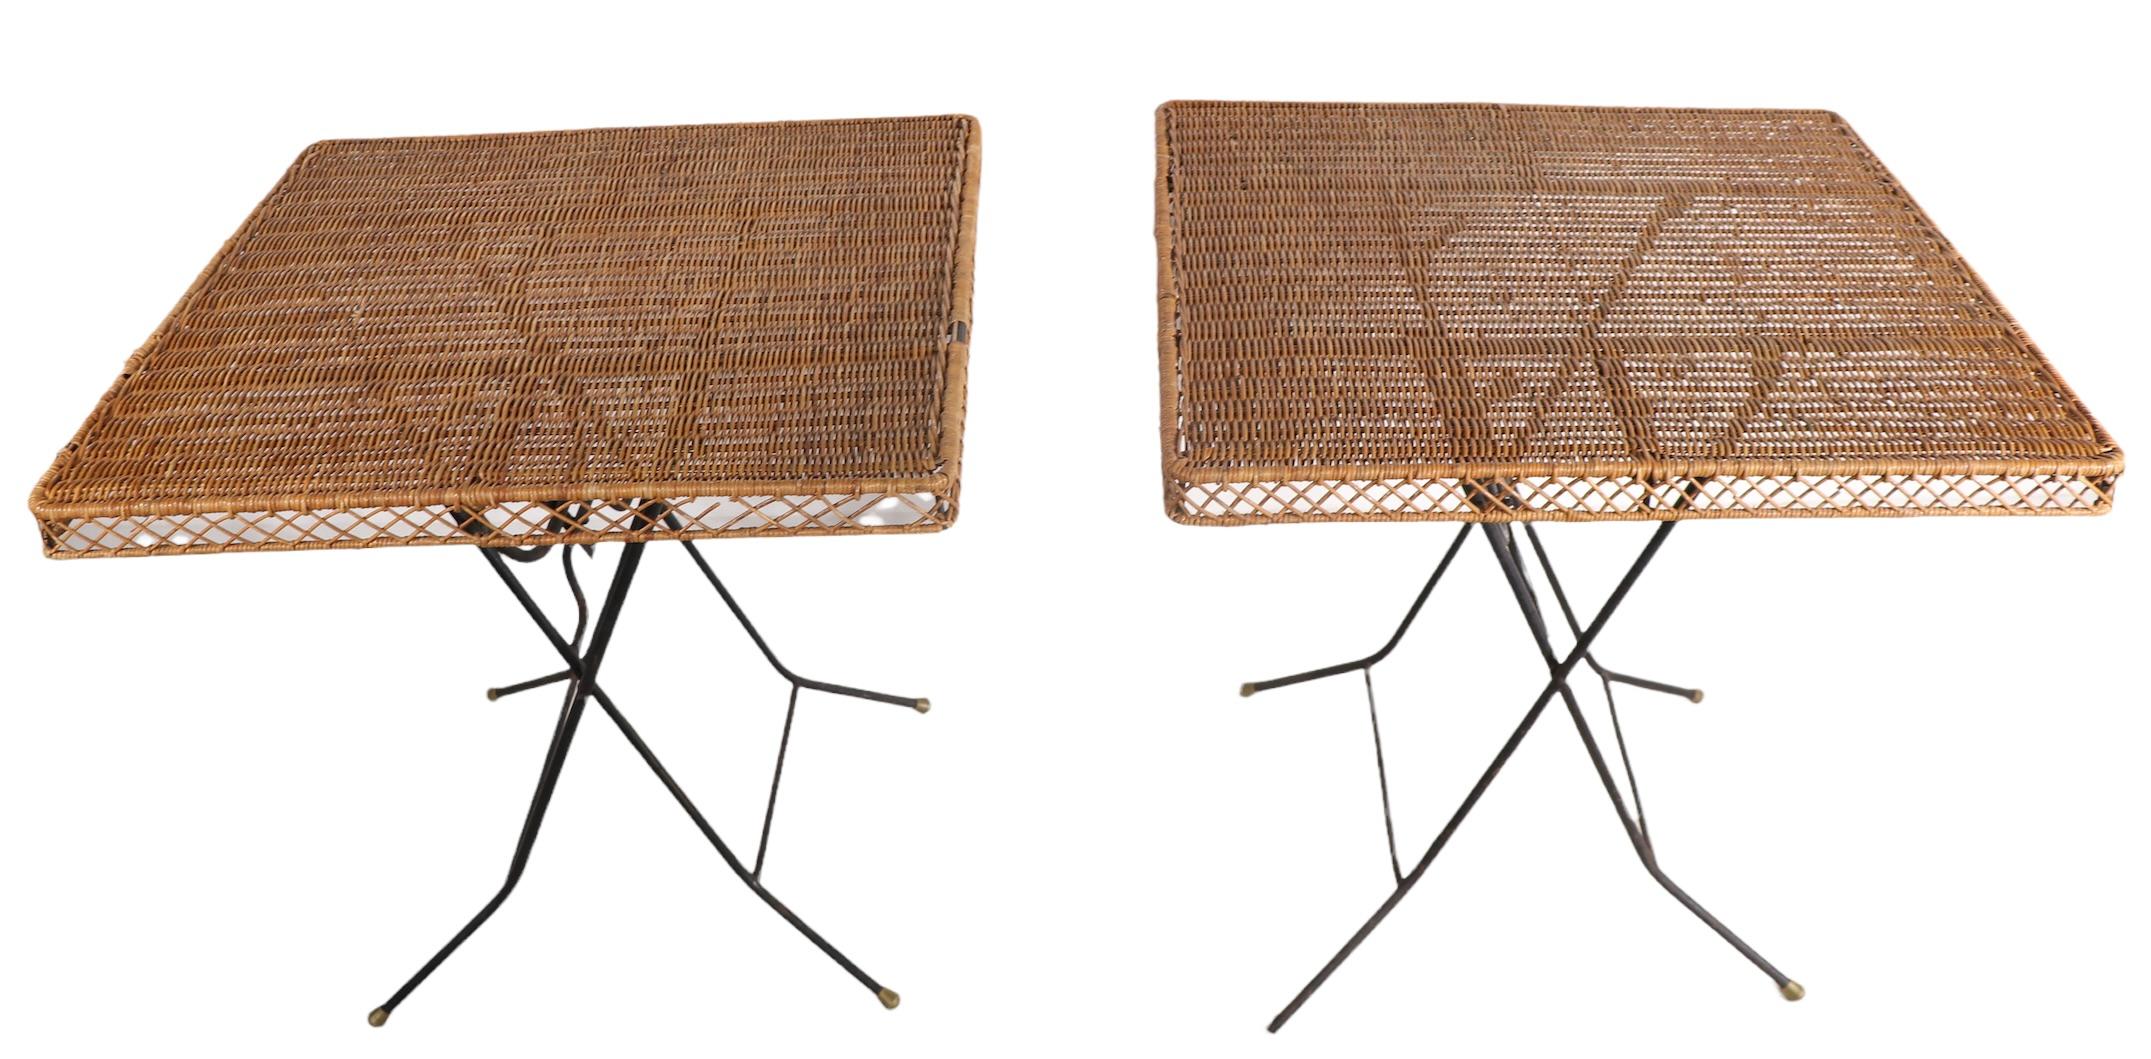 2 Folding Wicker and Iron Card or Dining Tables Danny Ho Fong 1950's 9